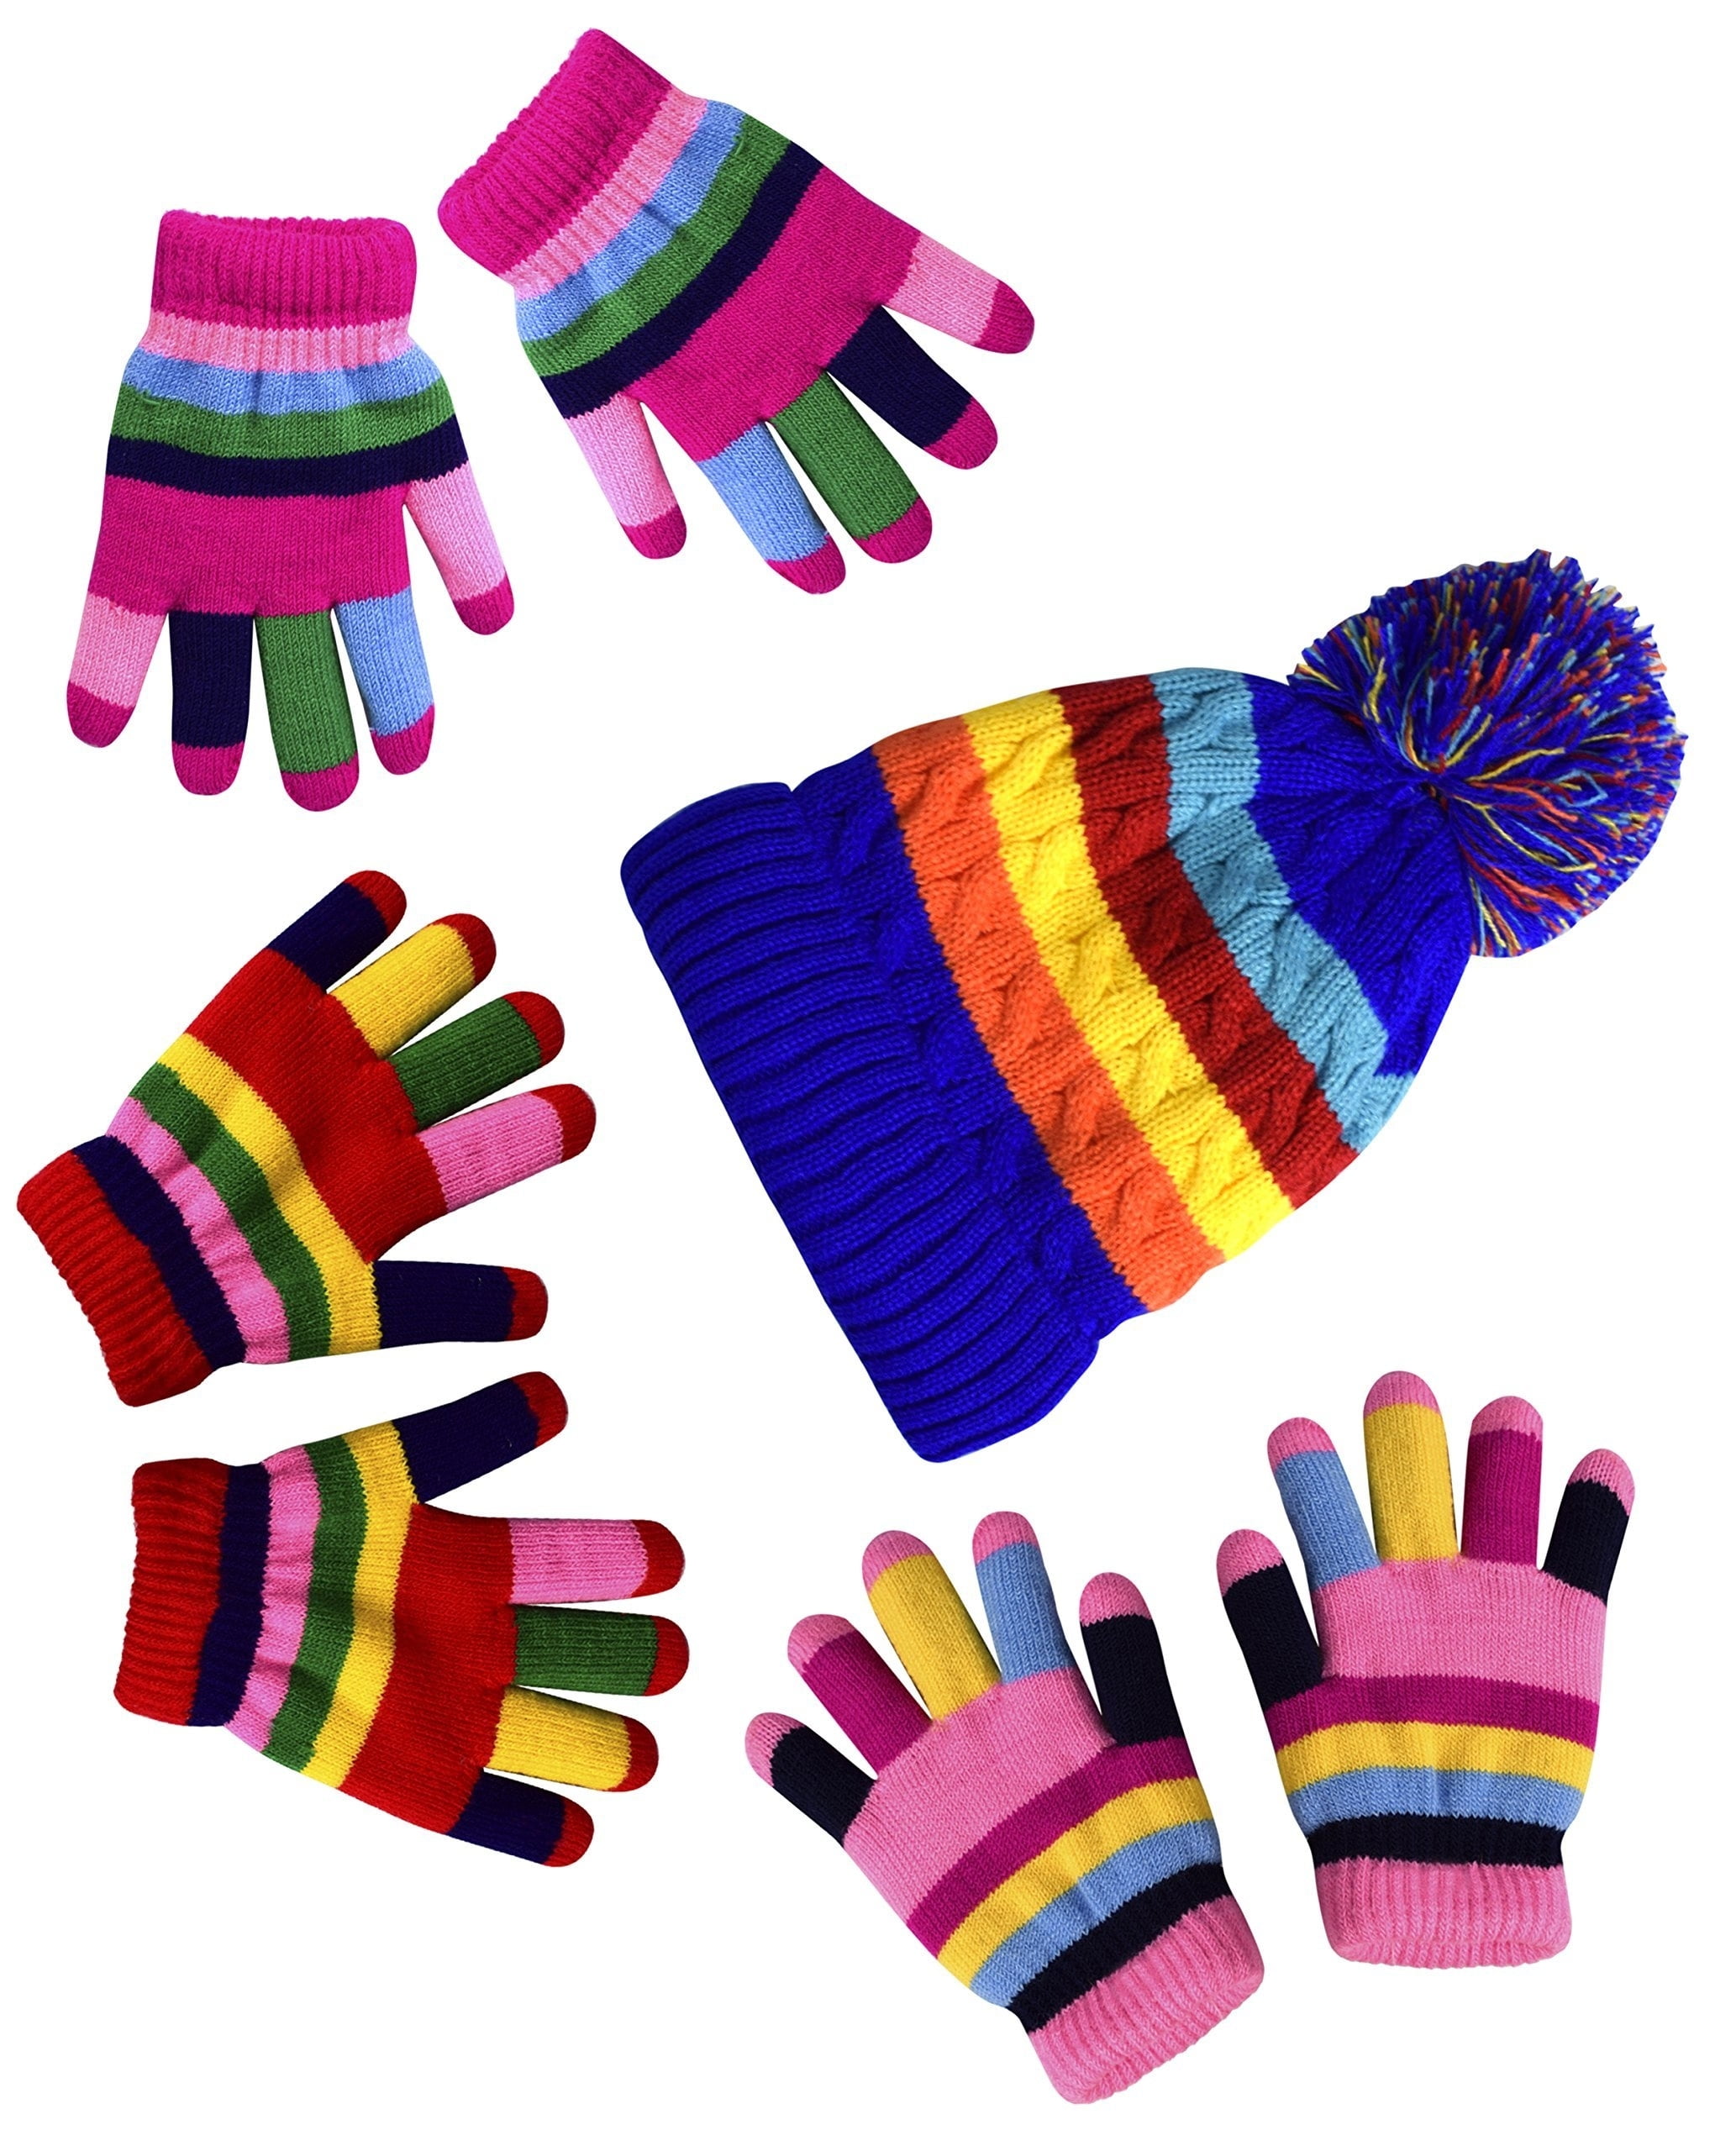 1~50 Dozen WHOLESALE LOT FUZZY FURRY MAGIC WINTER SOLID GLOVES WARM KNITTED Xmas 